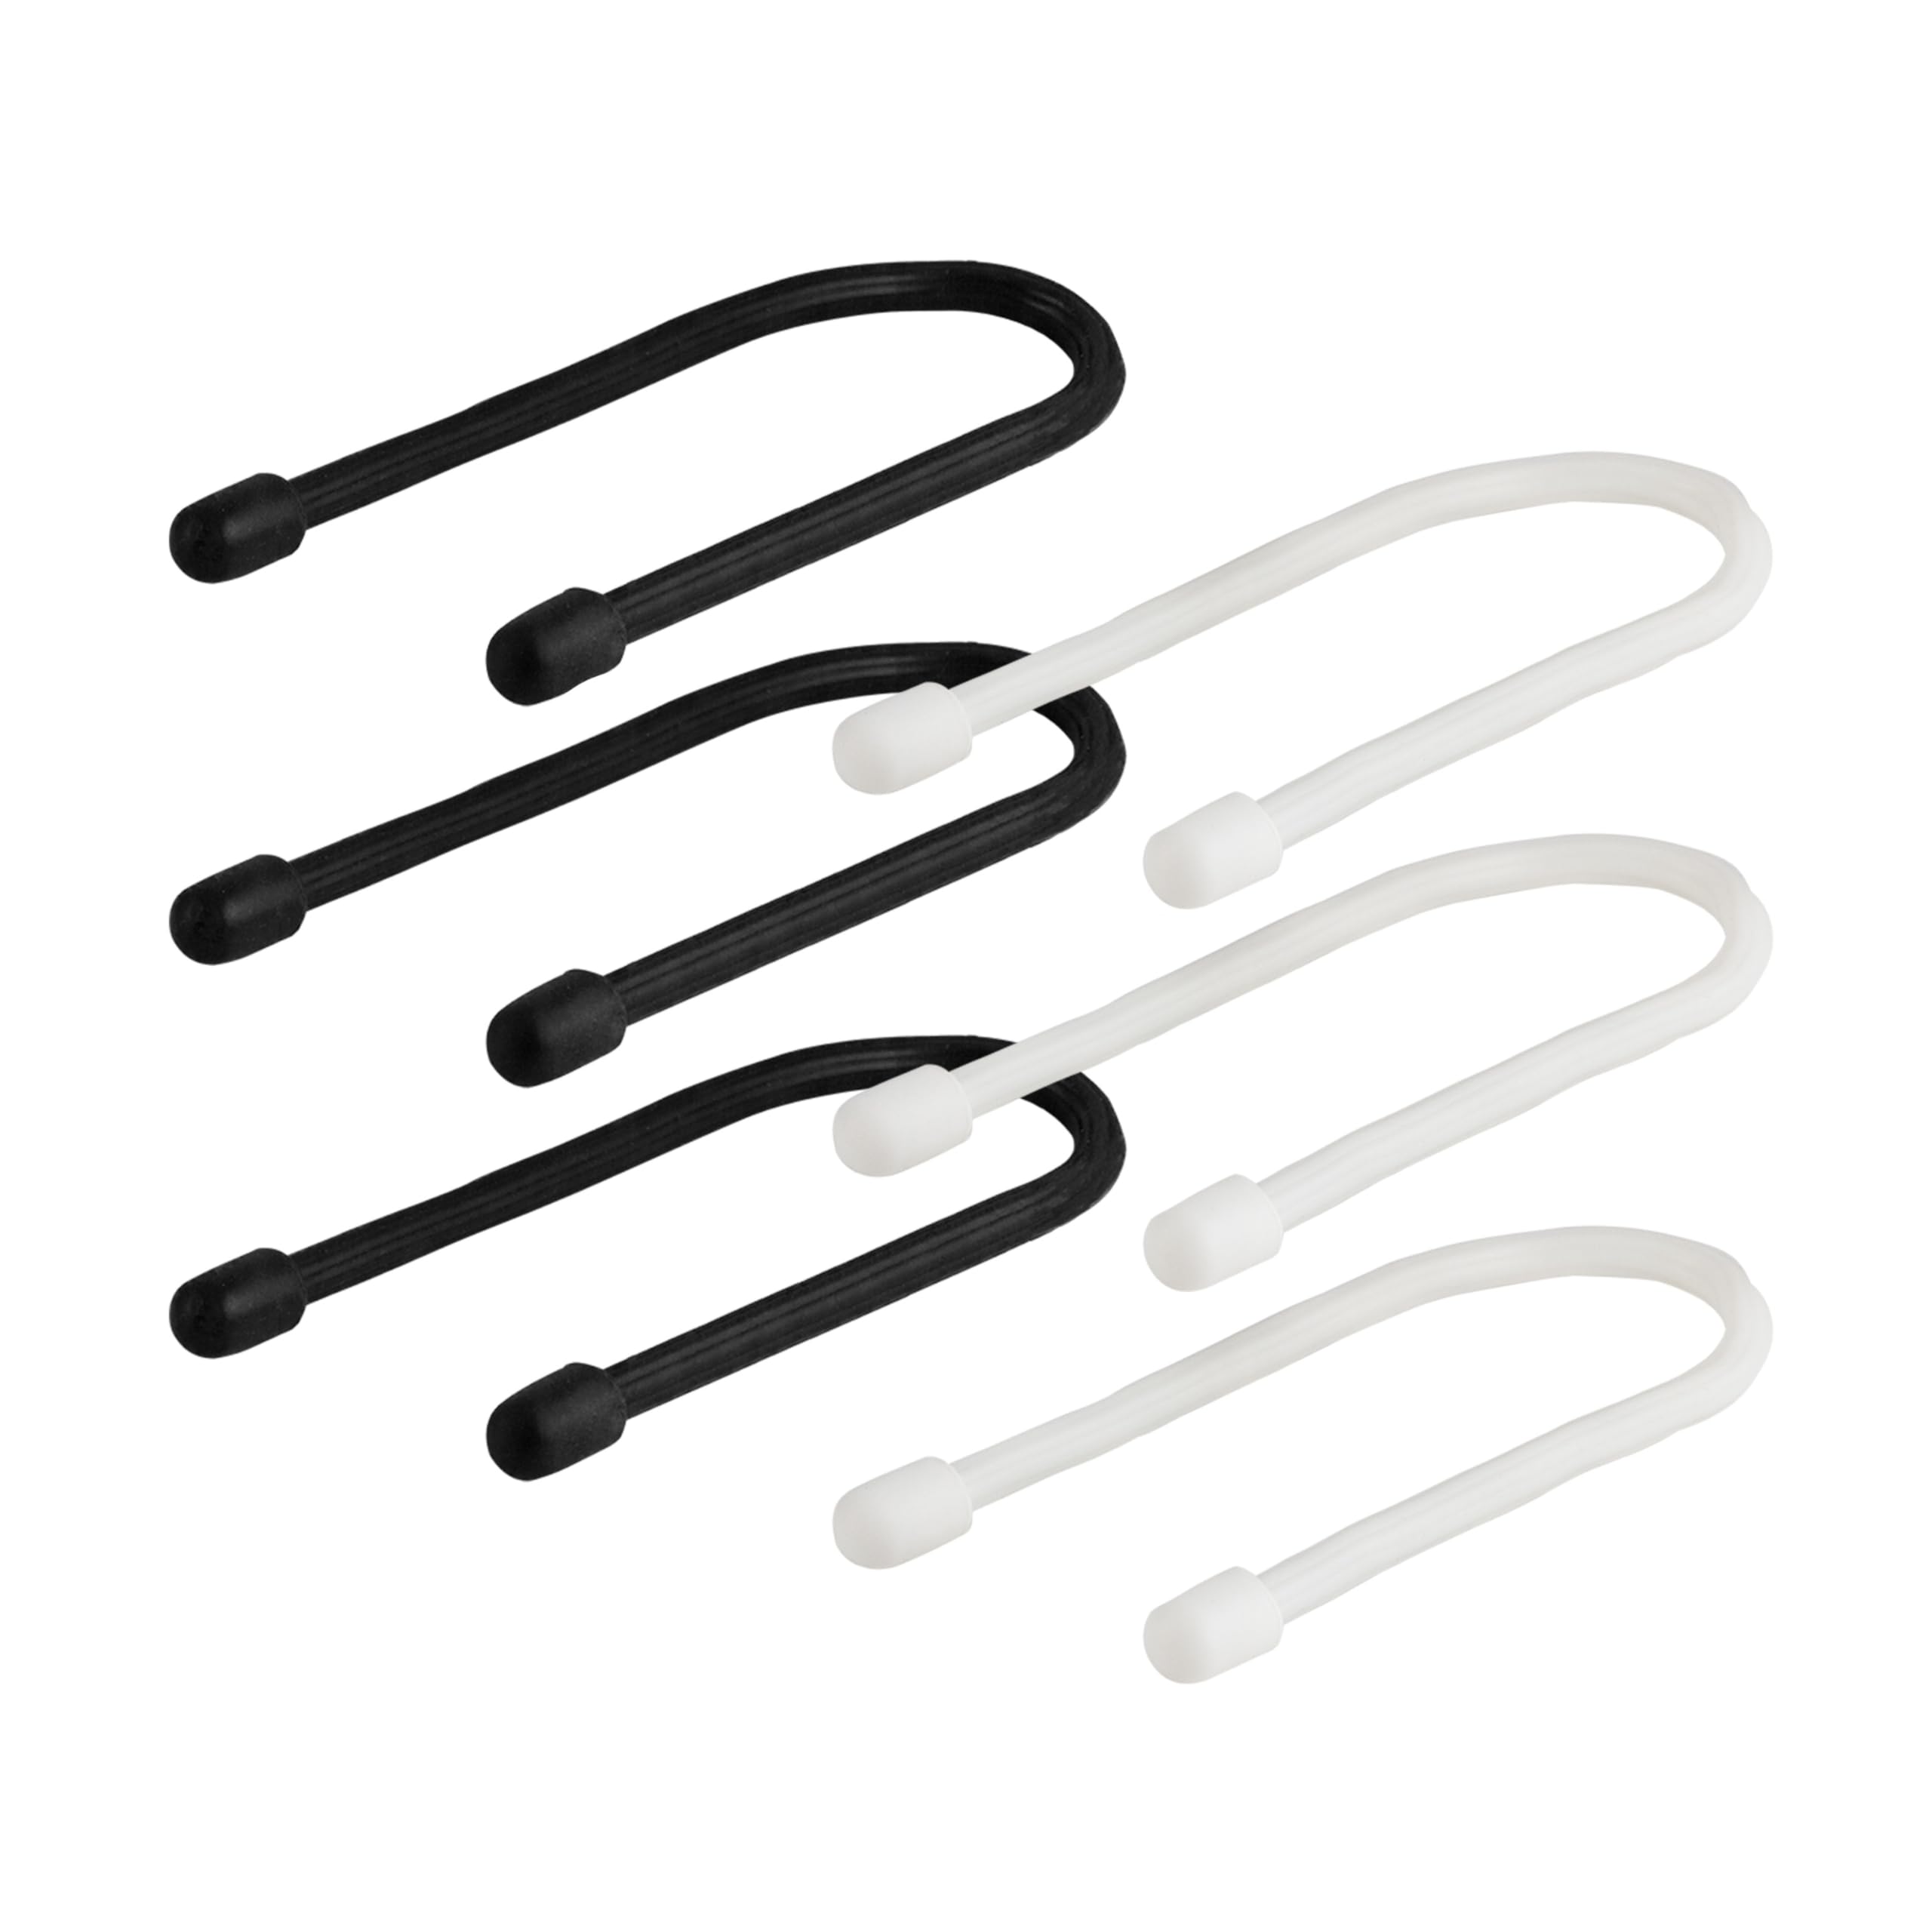 Philips 6 Piece Flex Ties 7 Inch Zip Ties Cable Management Multi-Purpose Cord Organizer Reusable Cable Ties for Extension Cords Power Strips Outdoor Lighting Black and White SWV4409/27